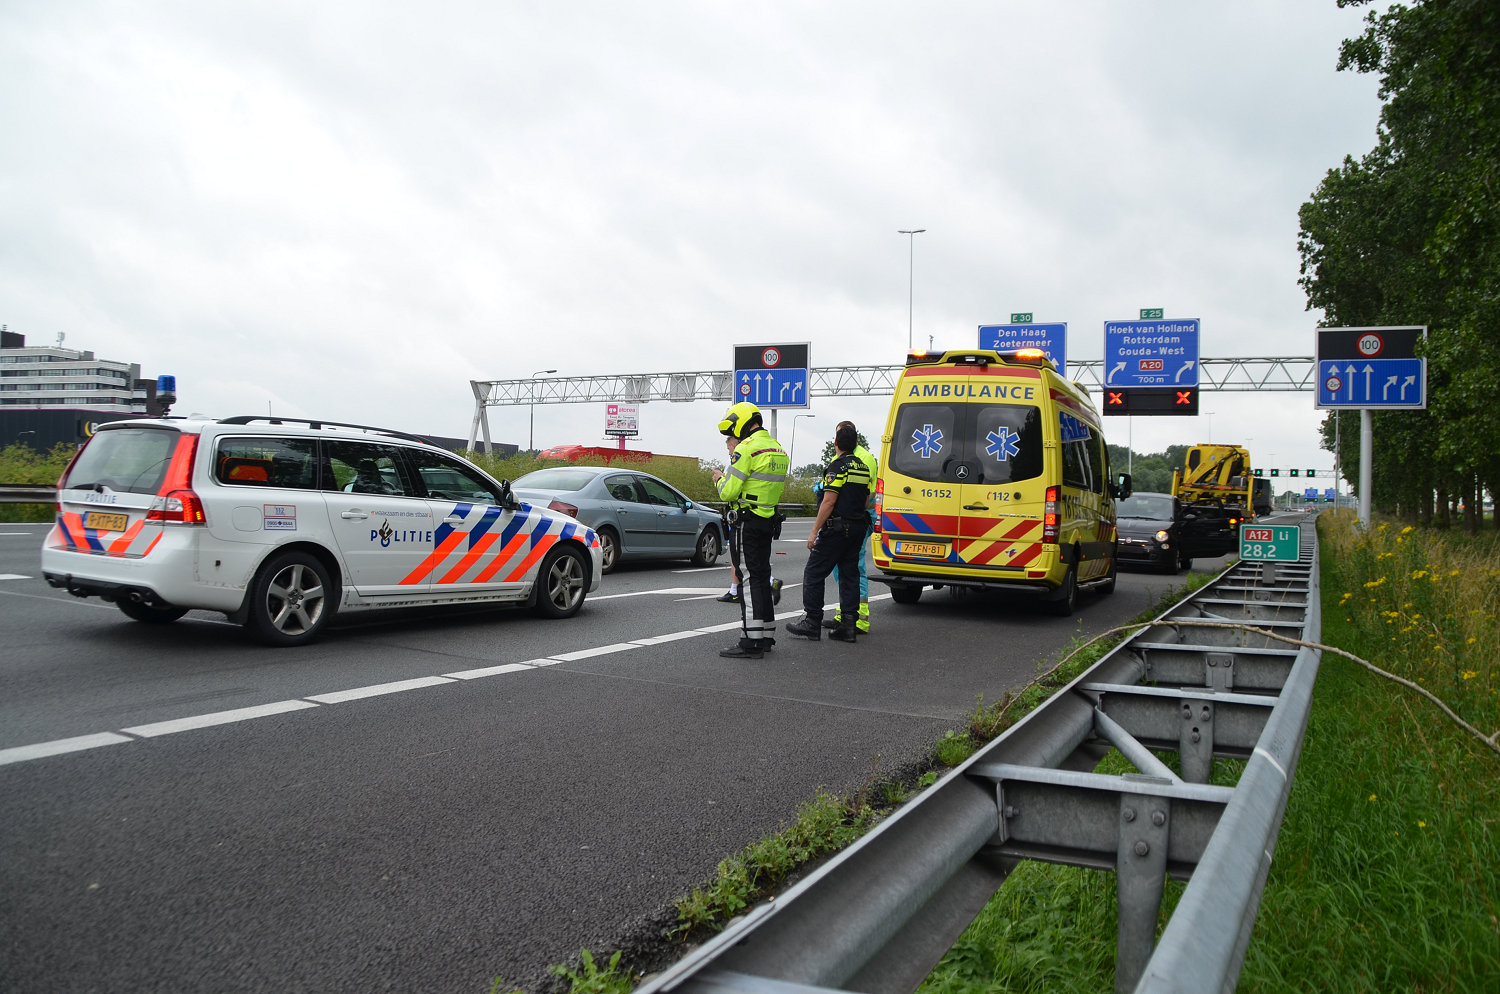 Accident on the A12 Left 28.2 on 1 July 2016 (photograph: Lars van der Toorn, 112HM)